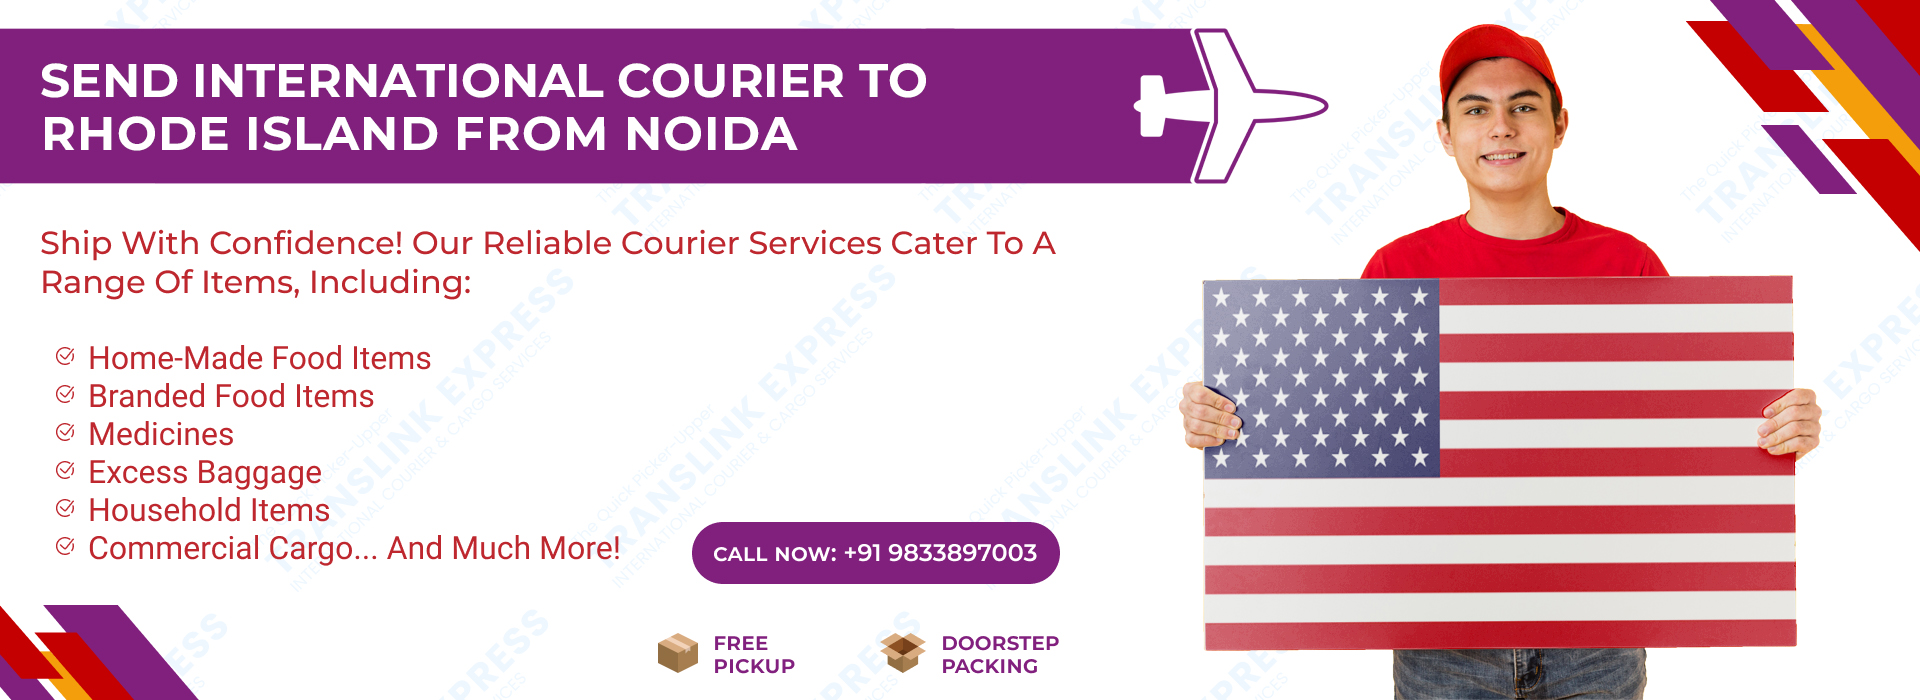 Courier to Rhode Island From Noida